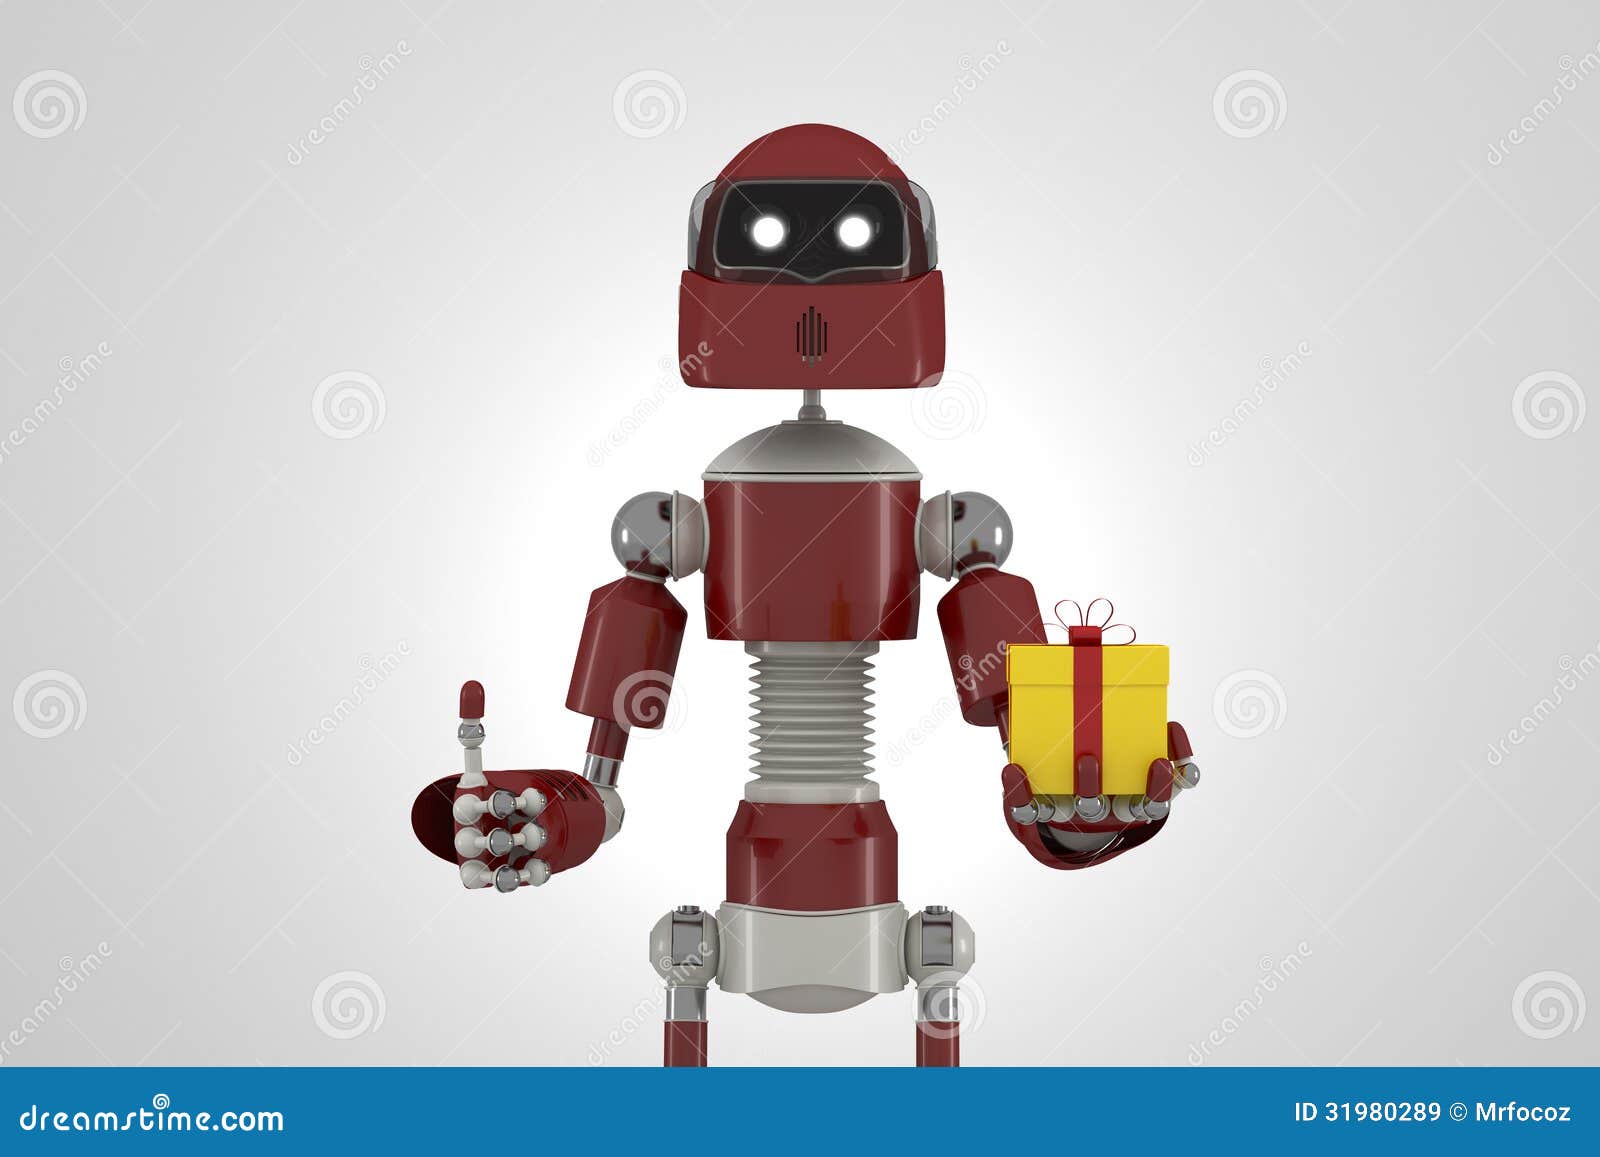 Robot with gift box stock illustration. Illustration of object - 31980289